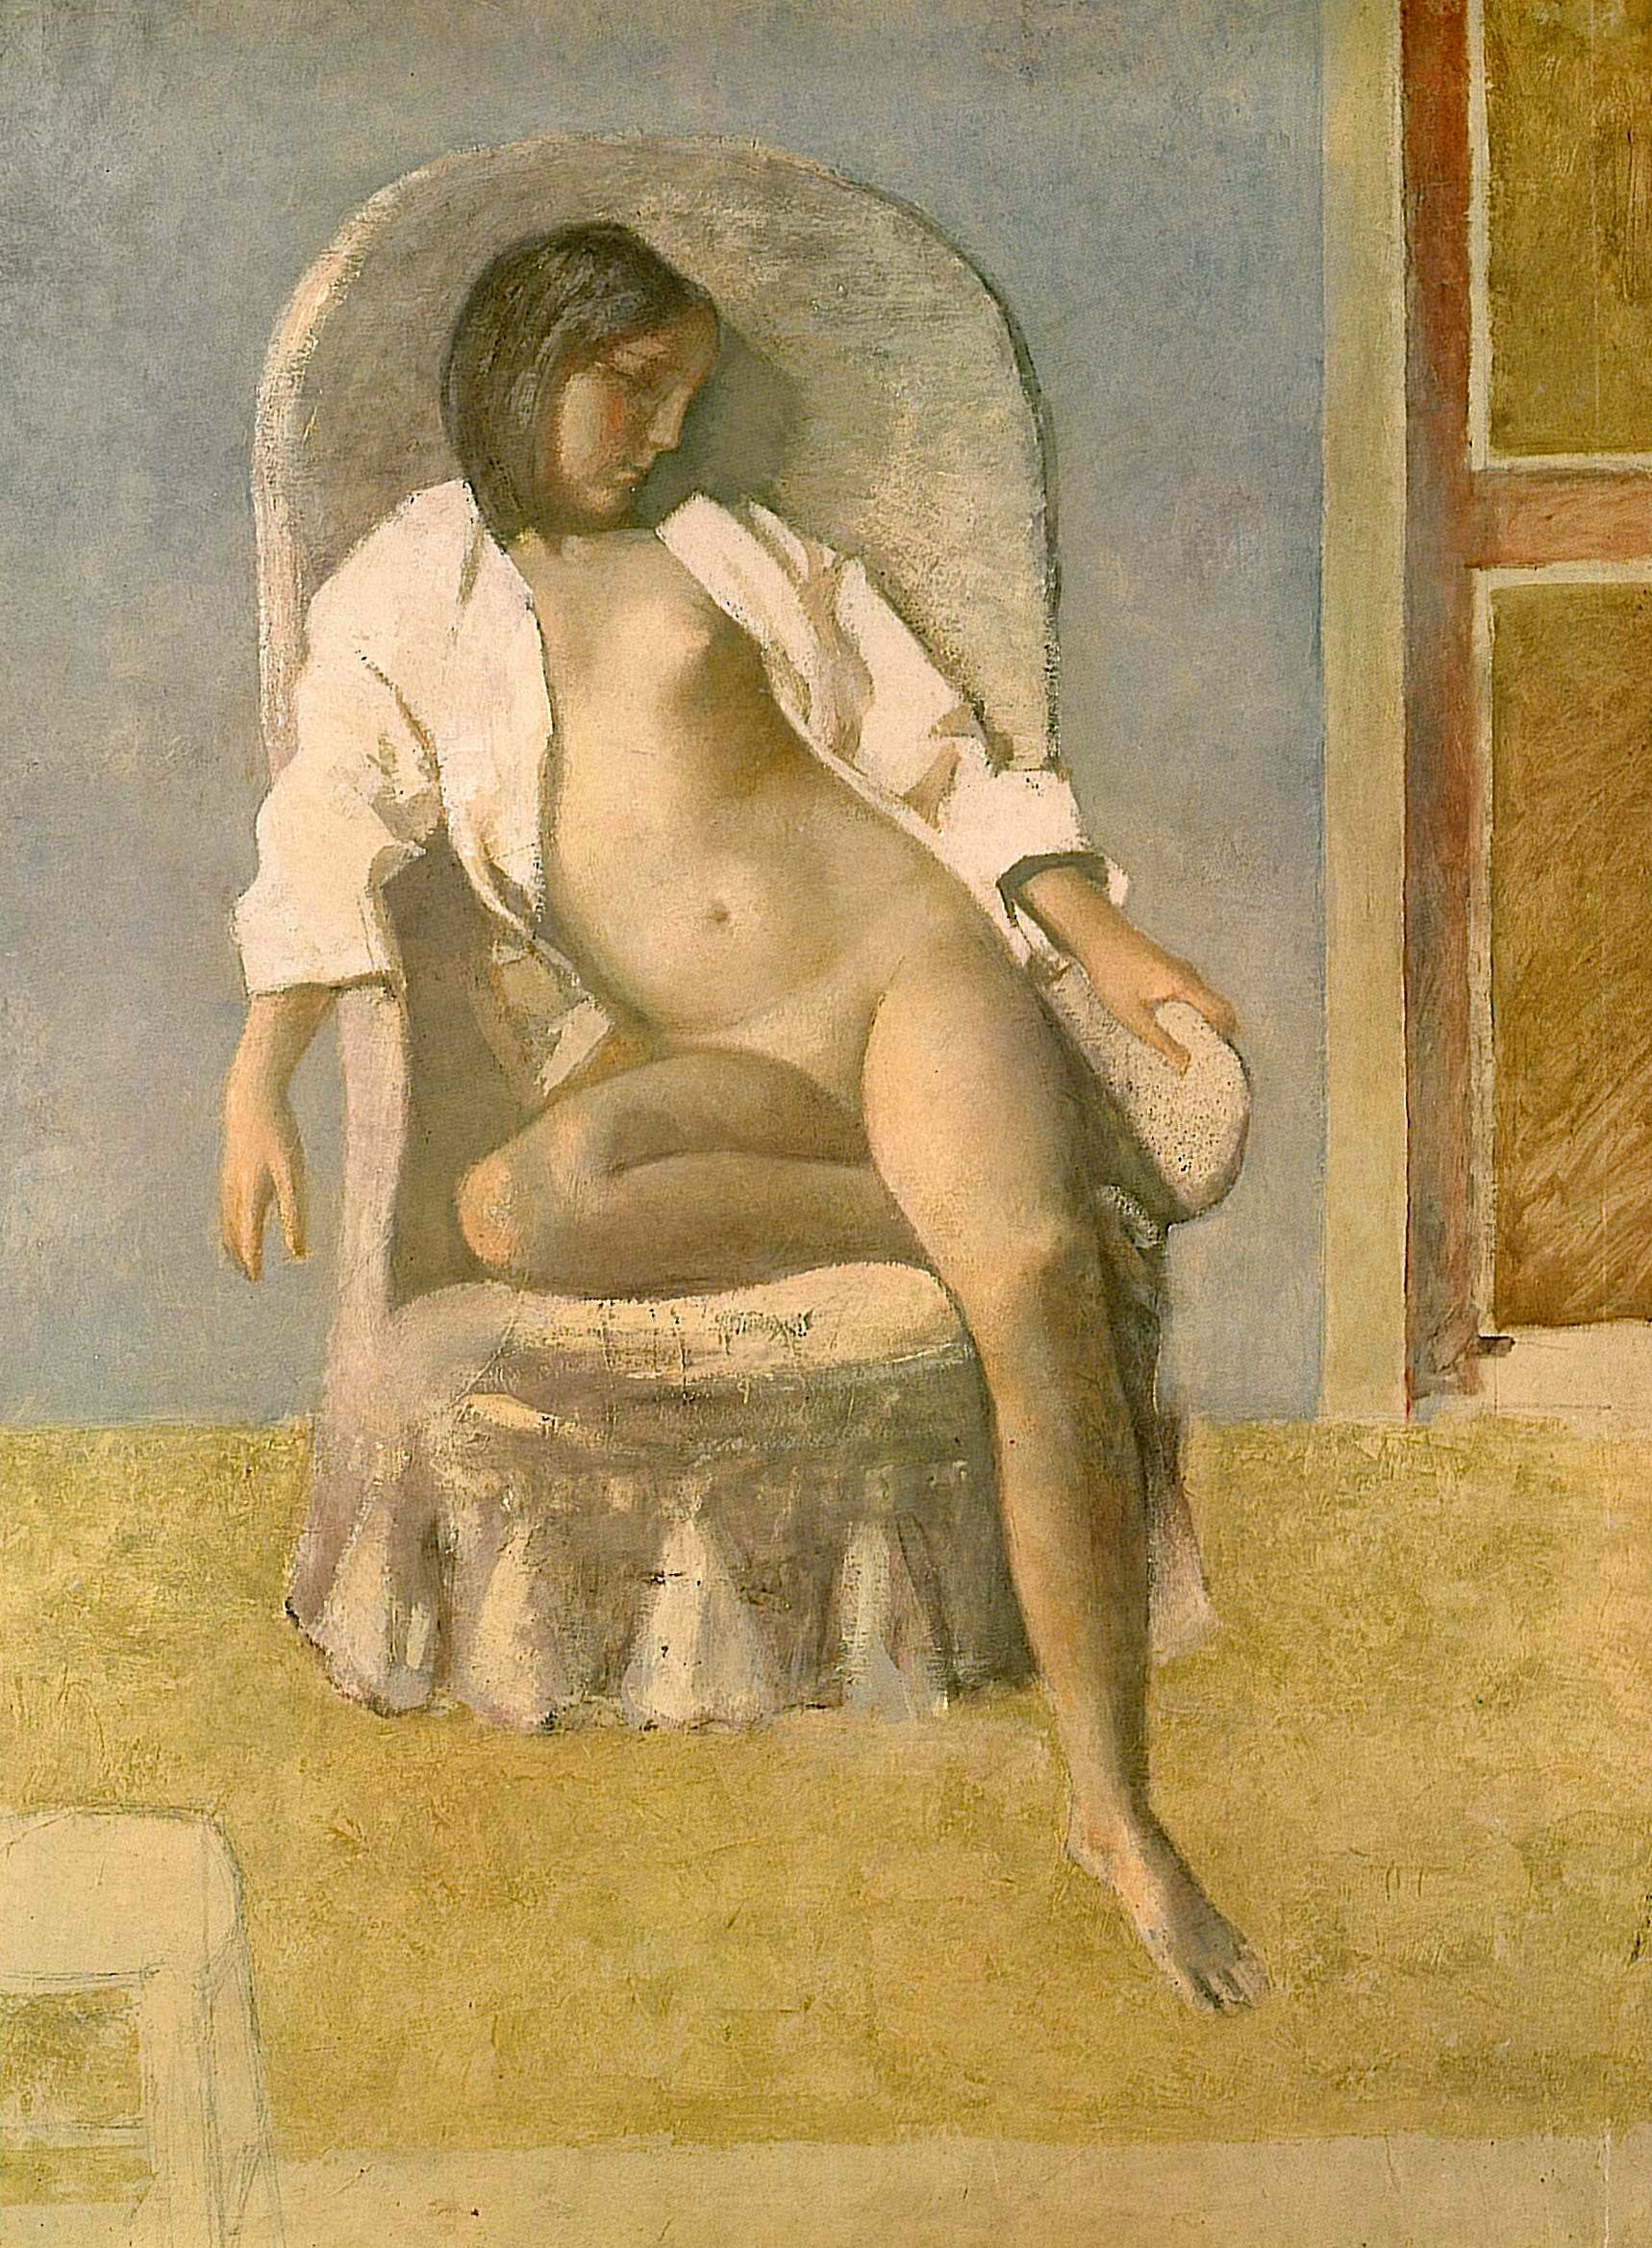 Nude at Rest, Balthus, 1977